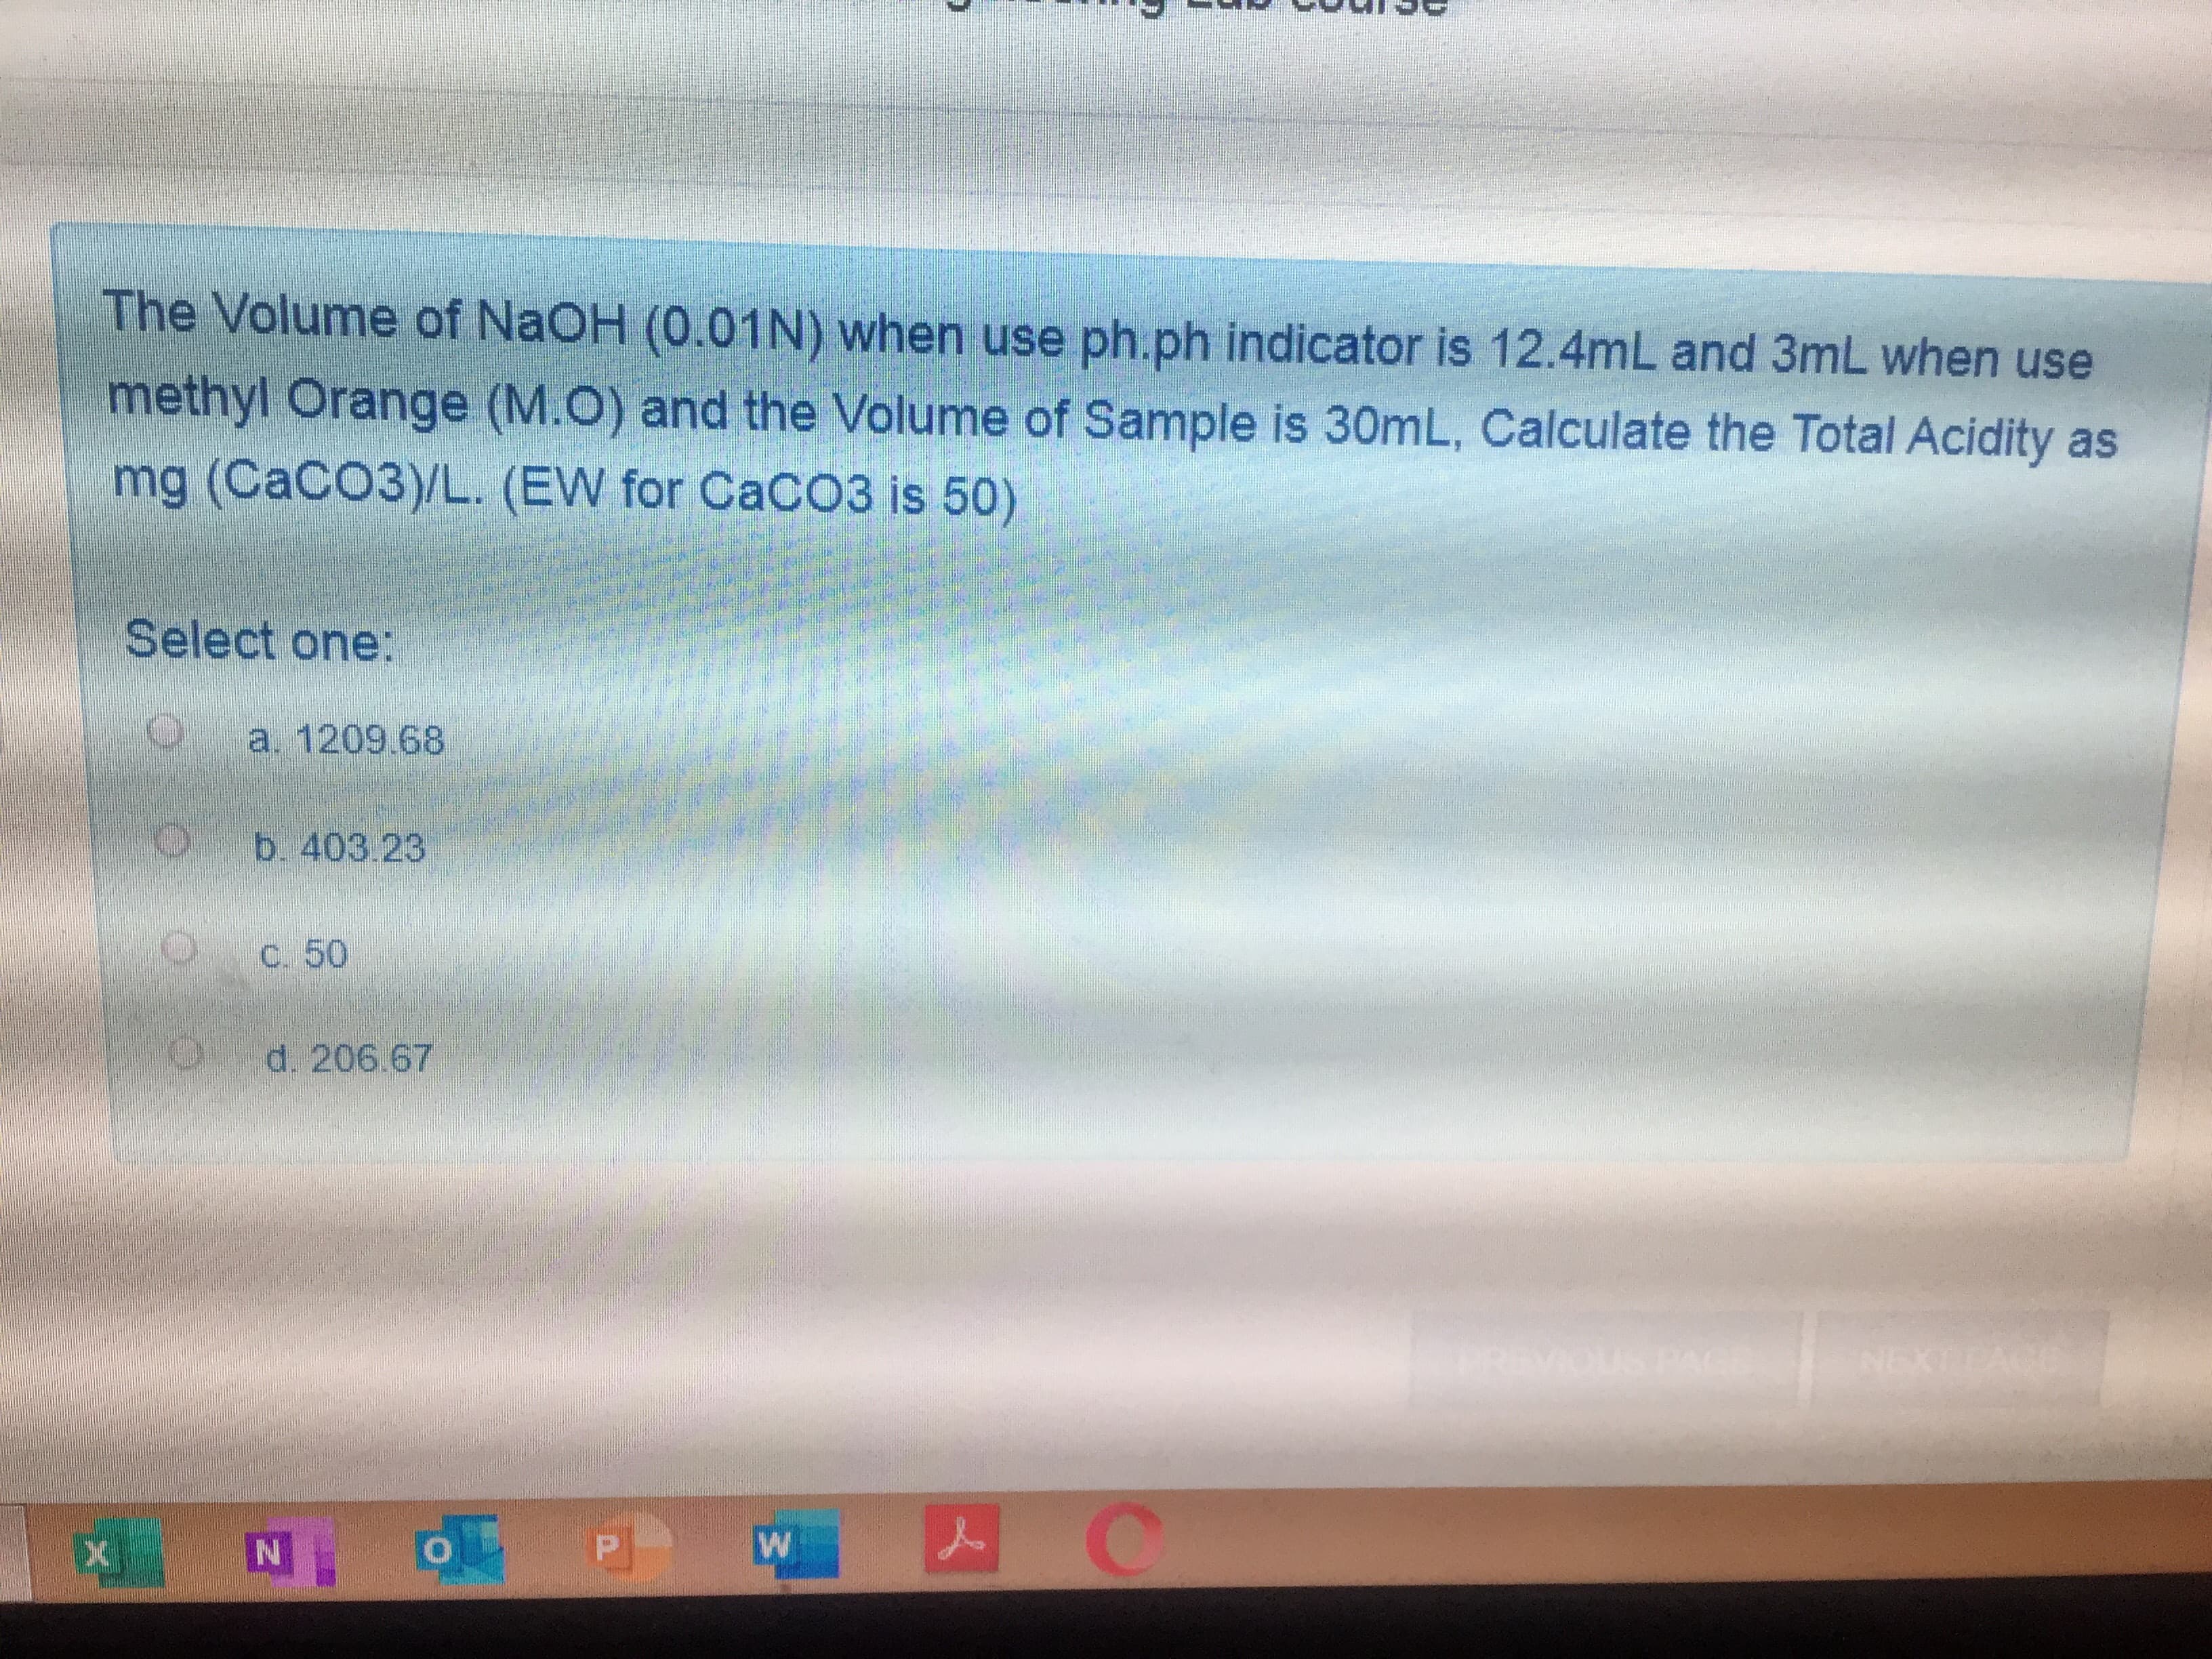 The Volume of NaOH (0.01N) when use ph.ph indicator is 12.4mL and 3mL when use
methyl Orange (M.O) and the Volume of Sample is 30mL, Calculate the Total Acidity as
mg (CaCO3)/L. (EW for CaCO3 is 50)
